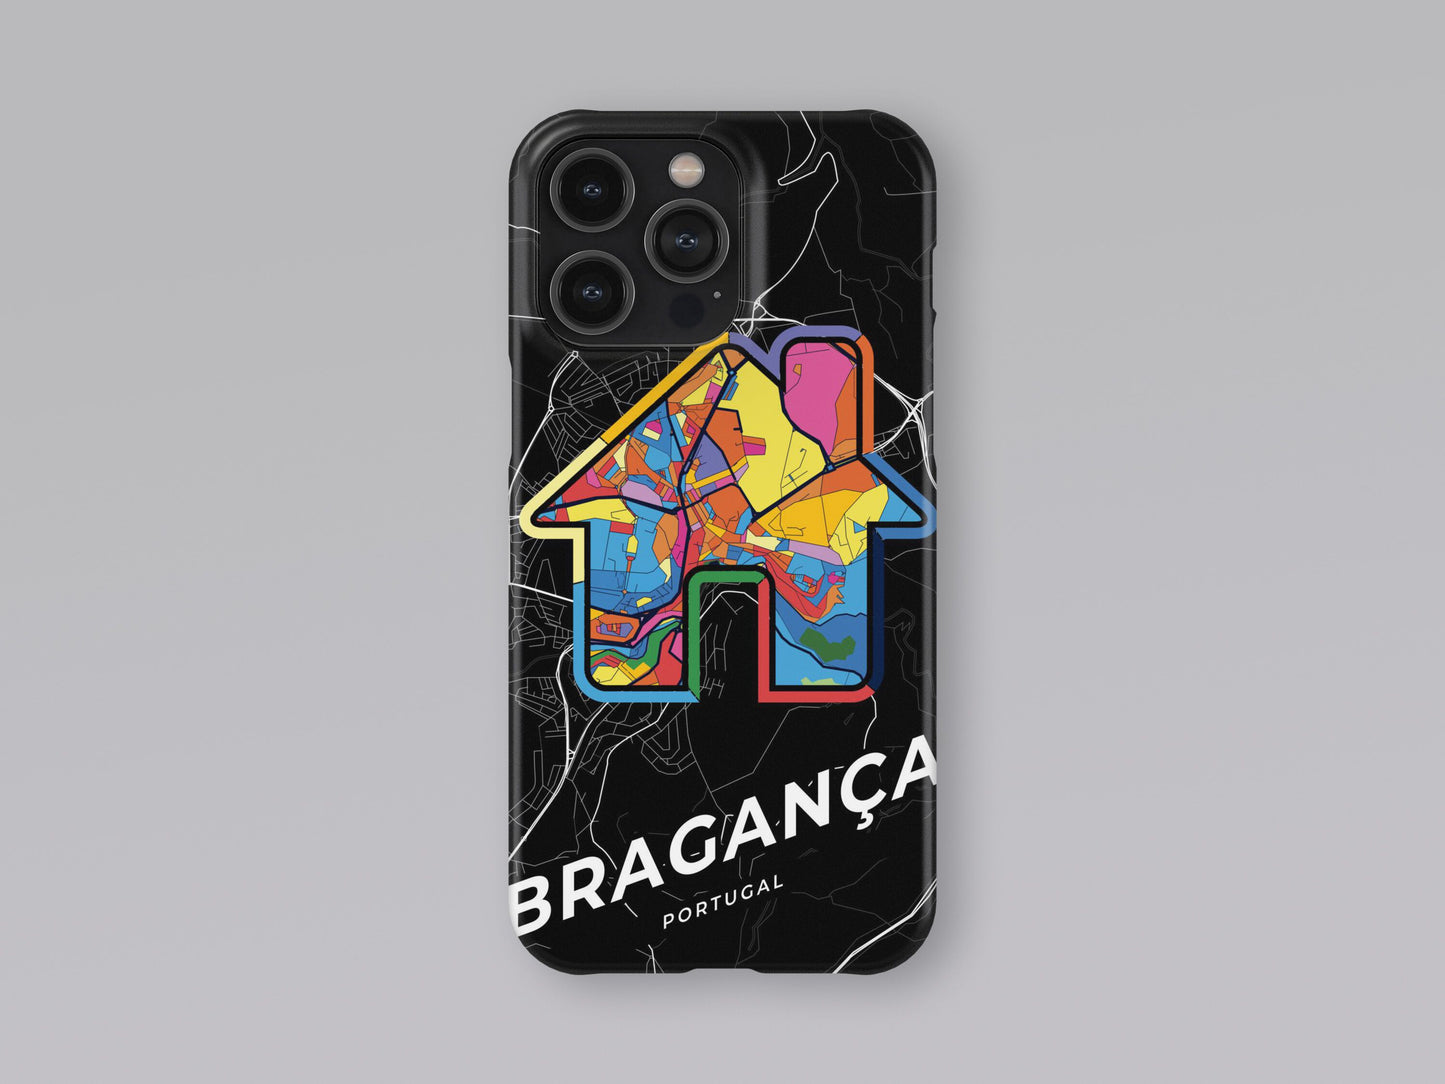 Bragança Portugal slim phone case with colorful icon. Birthday, wedding or housewarming gift. Couple match cases. 3